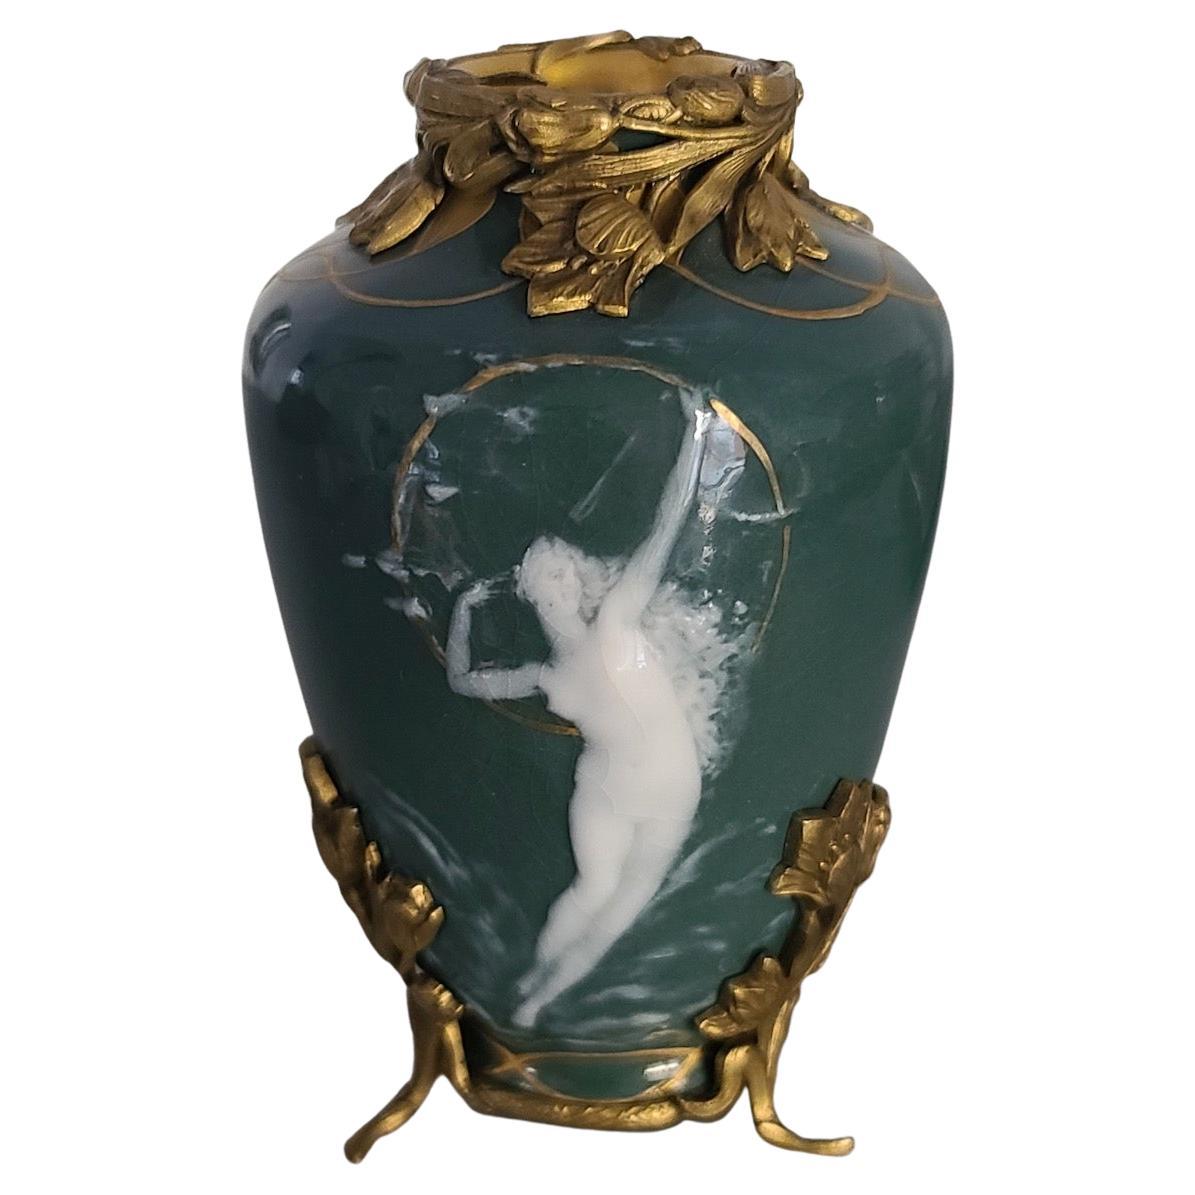 A French Art Nouveau Naïade Jewell Vase, circa 1890

A French Porcelain Pâte-sur-Pâte Jewell Vase 
Designed with a Naiade on a green and gilt highlights background 
Ormolu-mounted at the rim and resting on a removable tripod foot with typically